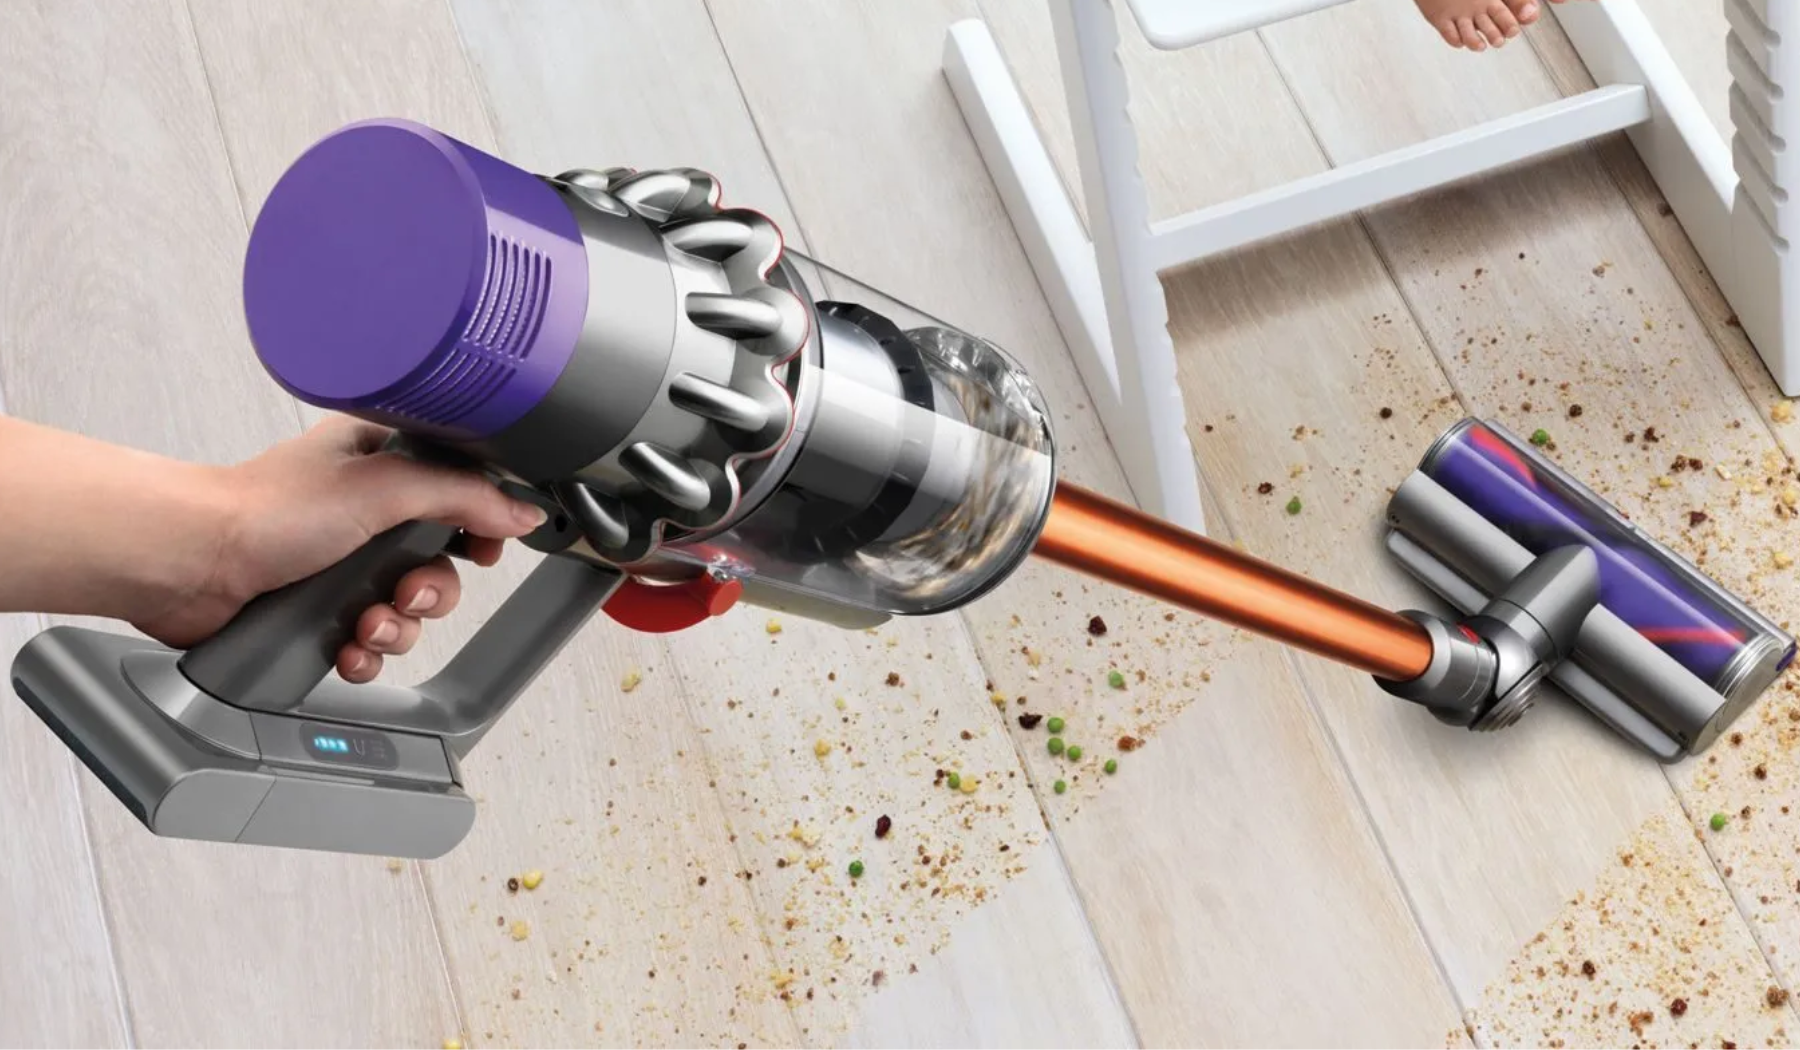 Forget Prime Day — Dyson’s official site sale is still going strong